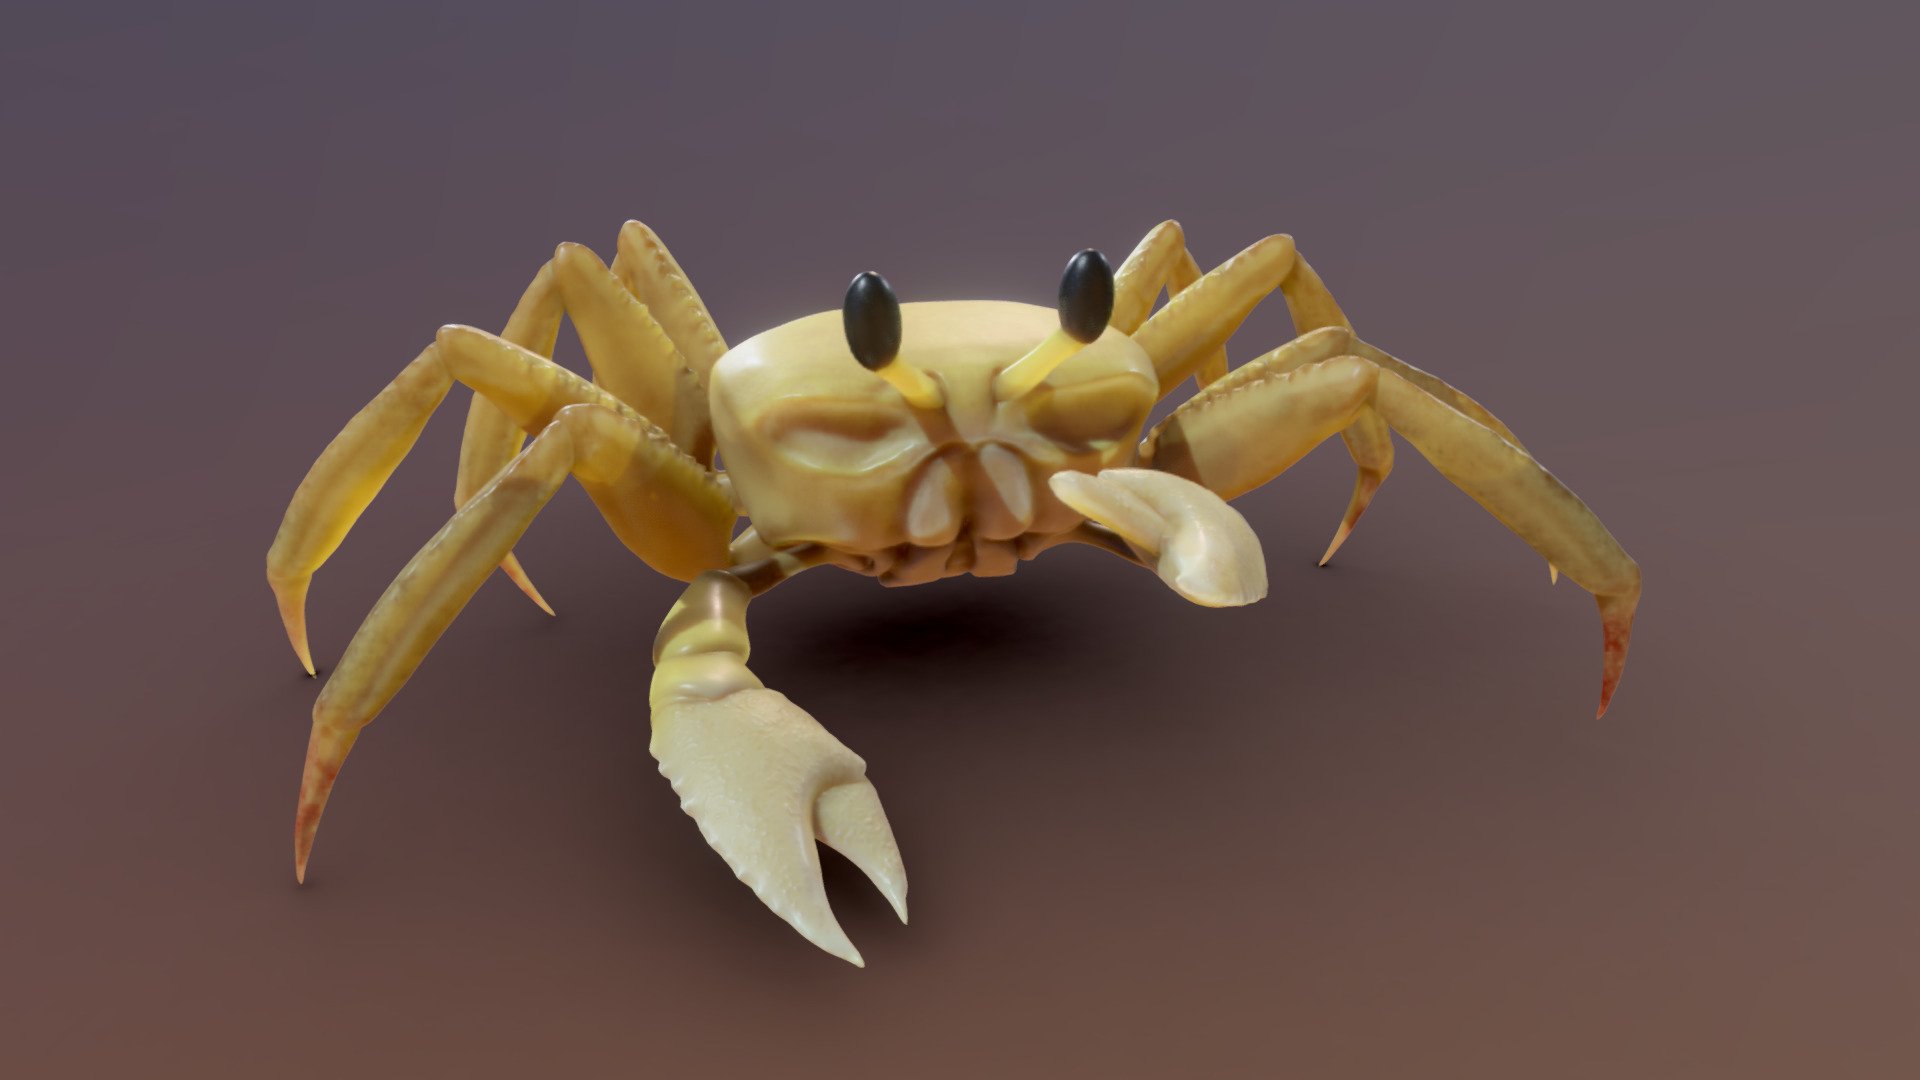 short 2 days work for a past challenge - Ghost Crab - 3D model by Zaxel 3d model